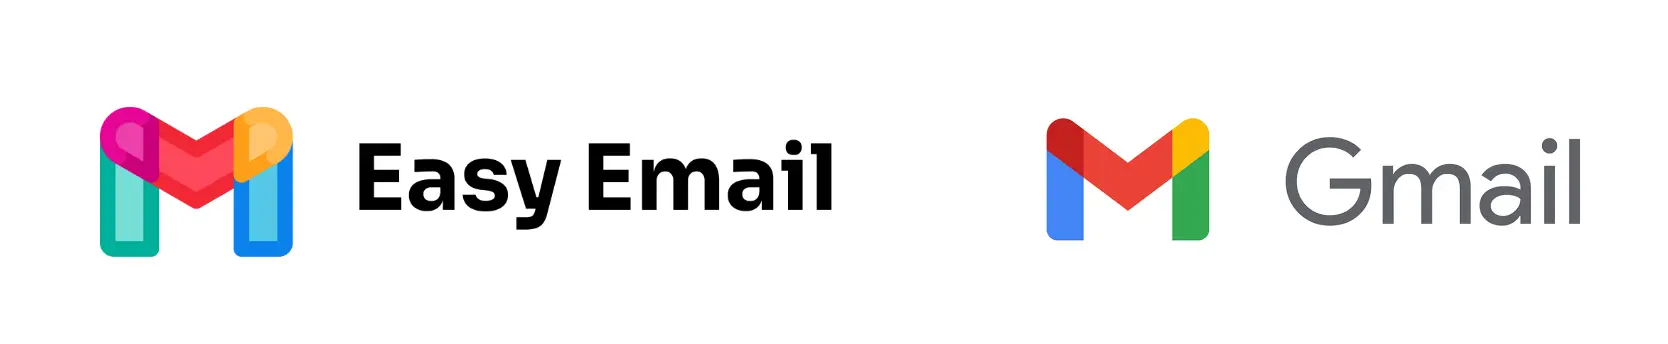 easymail-gmail